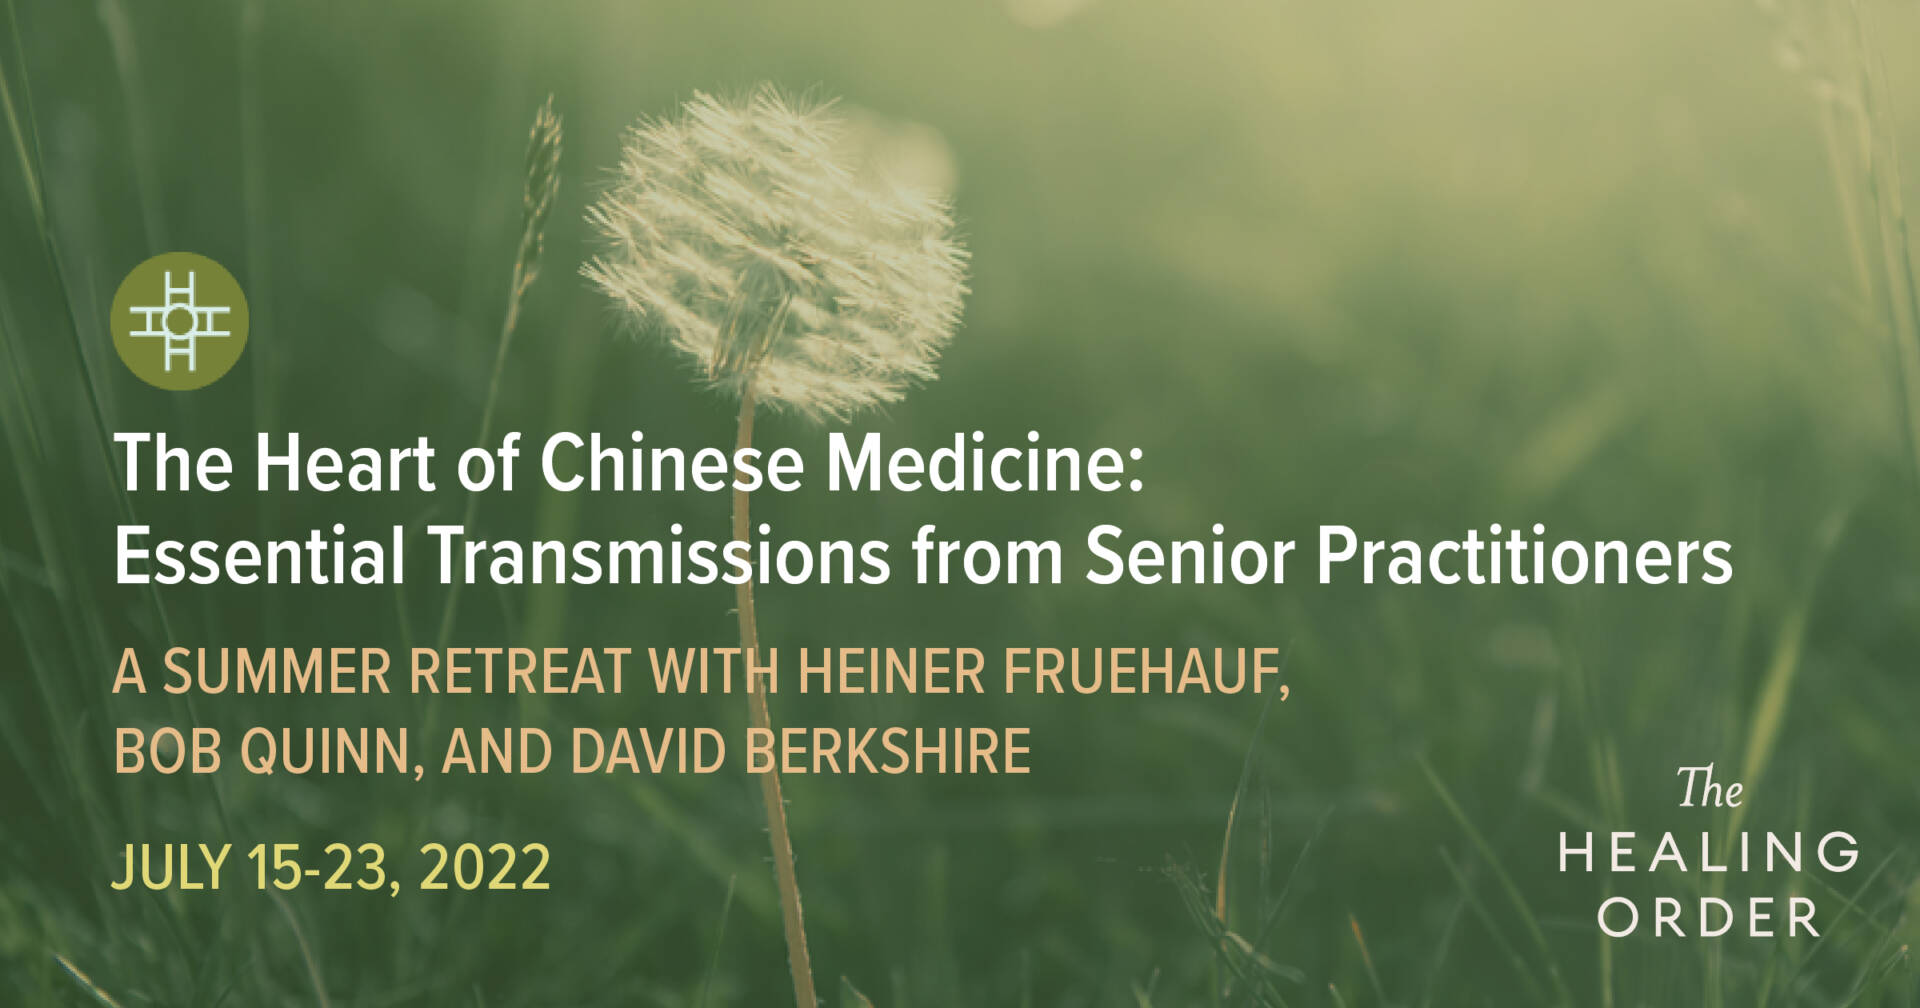 The Heart of Chinese Medicine: Essential Transmissions from Senior Practitioners